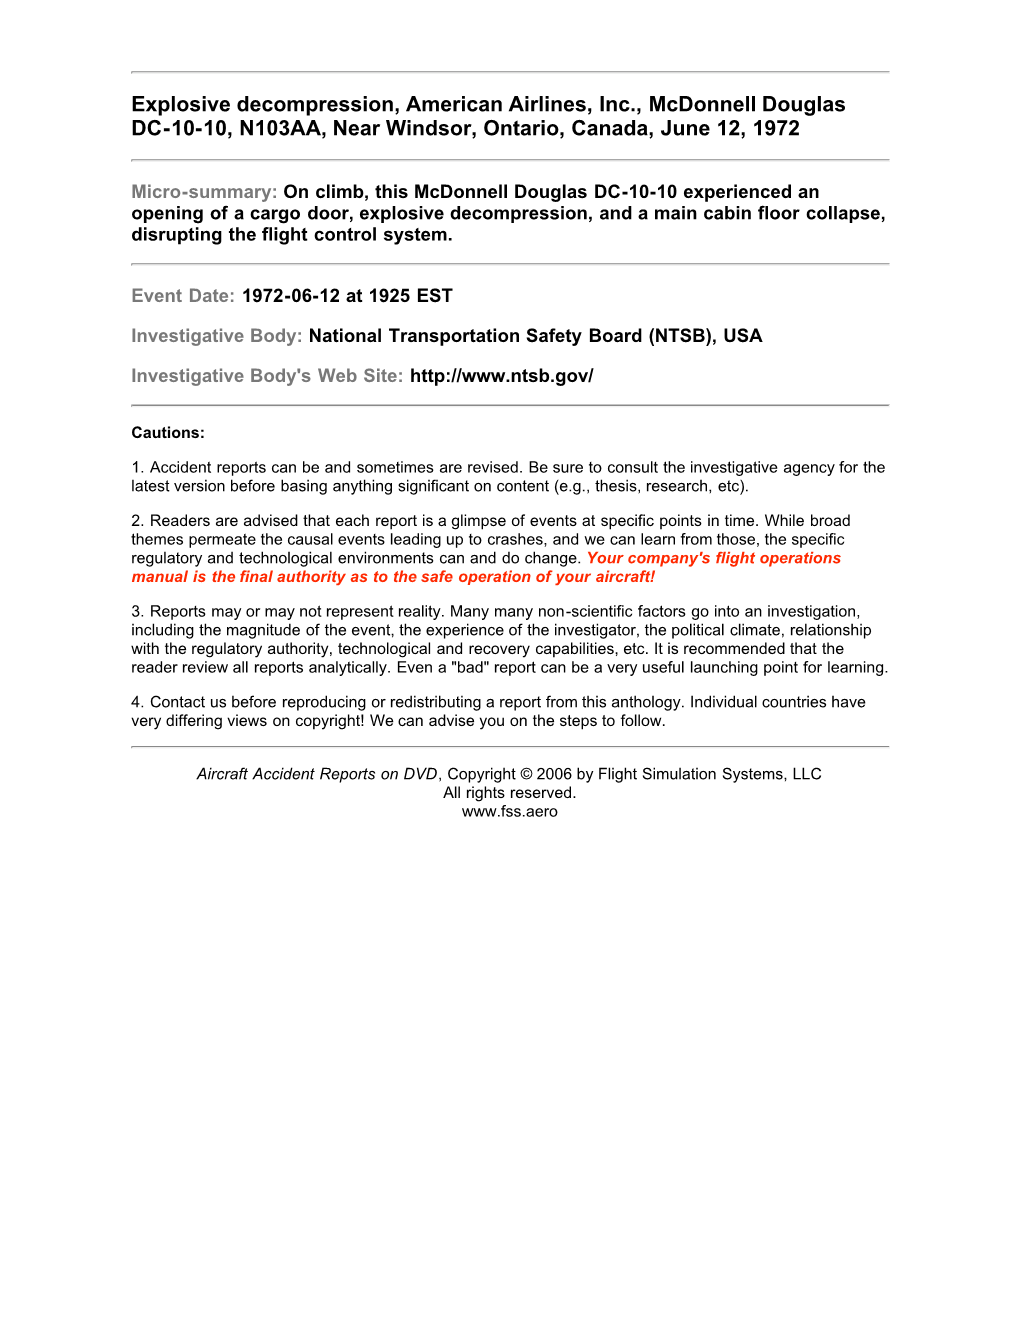 Aircraft Accident Report: American Airlines, Inc., Mcdonnell Douglas